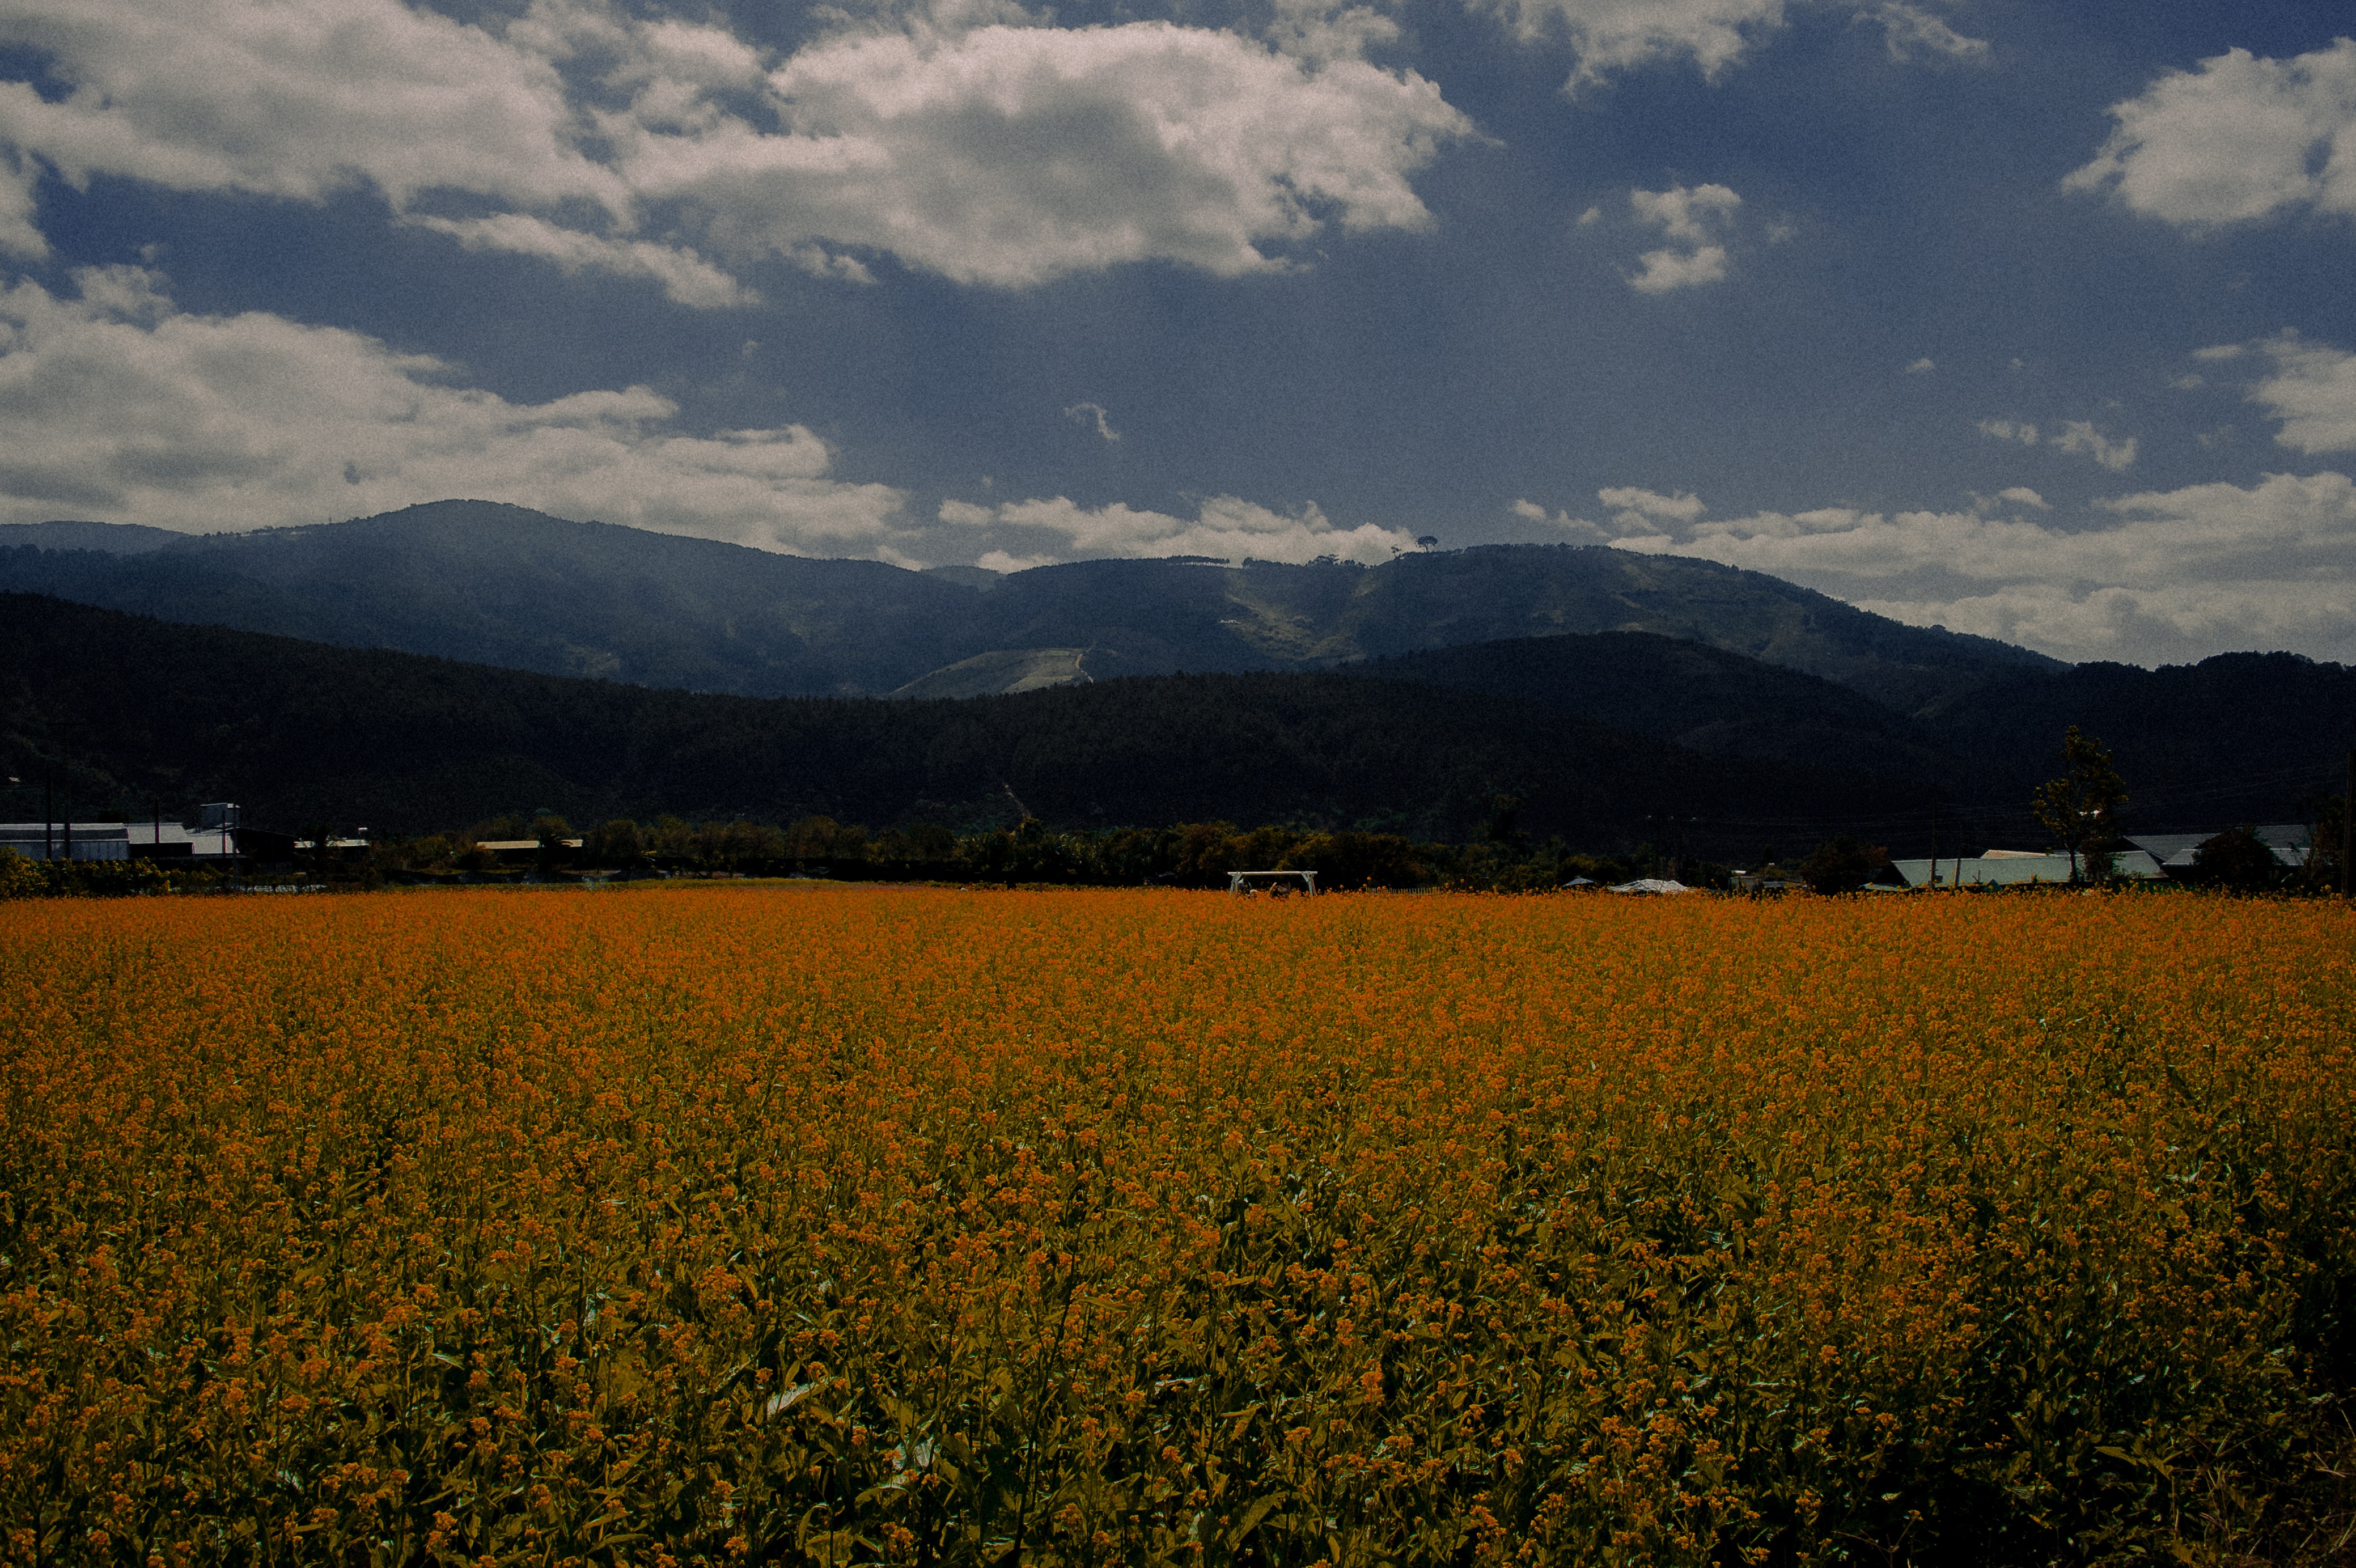 Photography of Flower Field, Agriculture, Landscape, Scenic, Scenery, HQ Photo